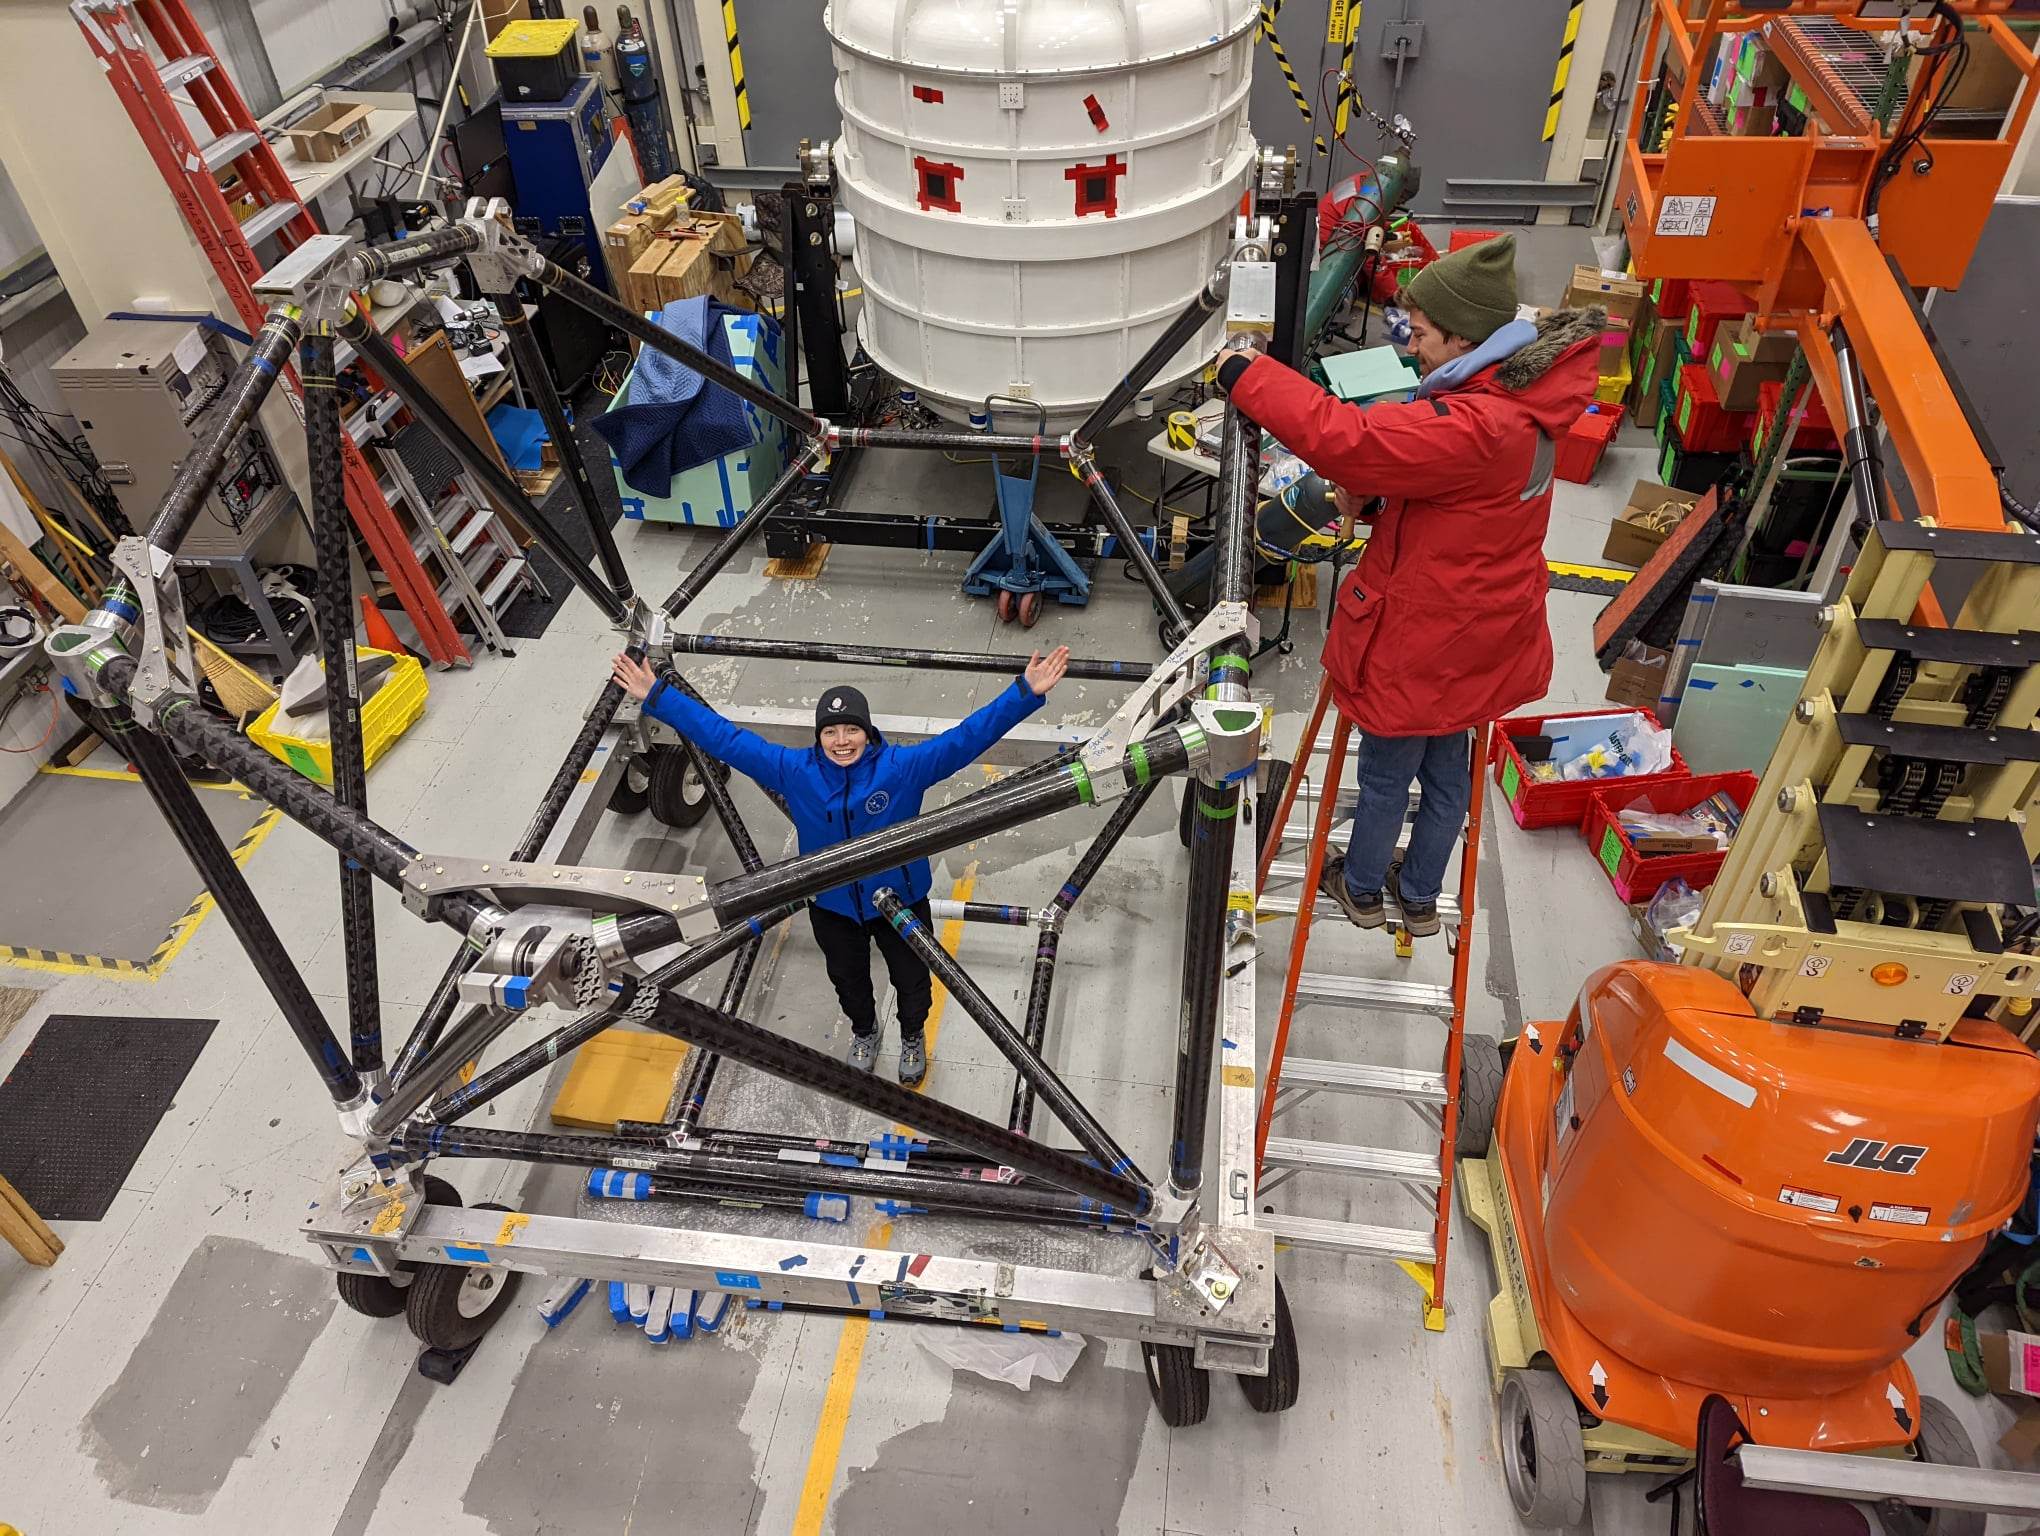 The cryostat (white cylinder in the background) is supported and controlled by an aluminum and carbon-fibre frame. In this image Susan Redmond is standing where the reaction wheel gets mounted. The reaction wheel uses angular momentum and enables scanning of the telescope.

PHOTO: SUBMITTED